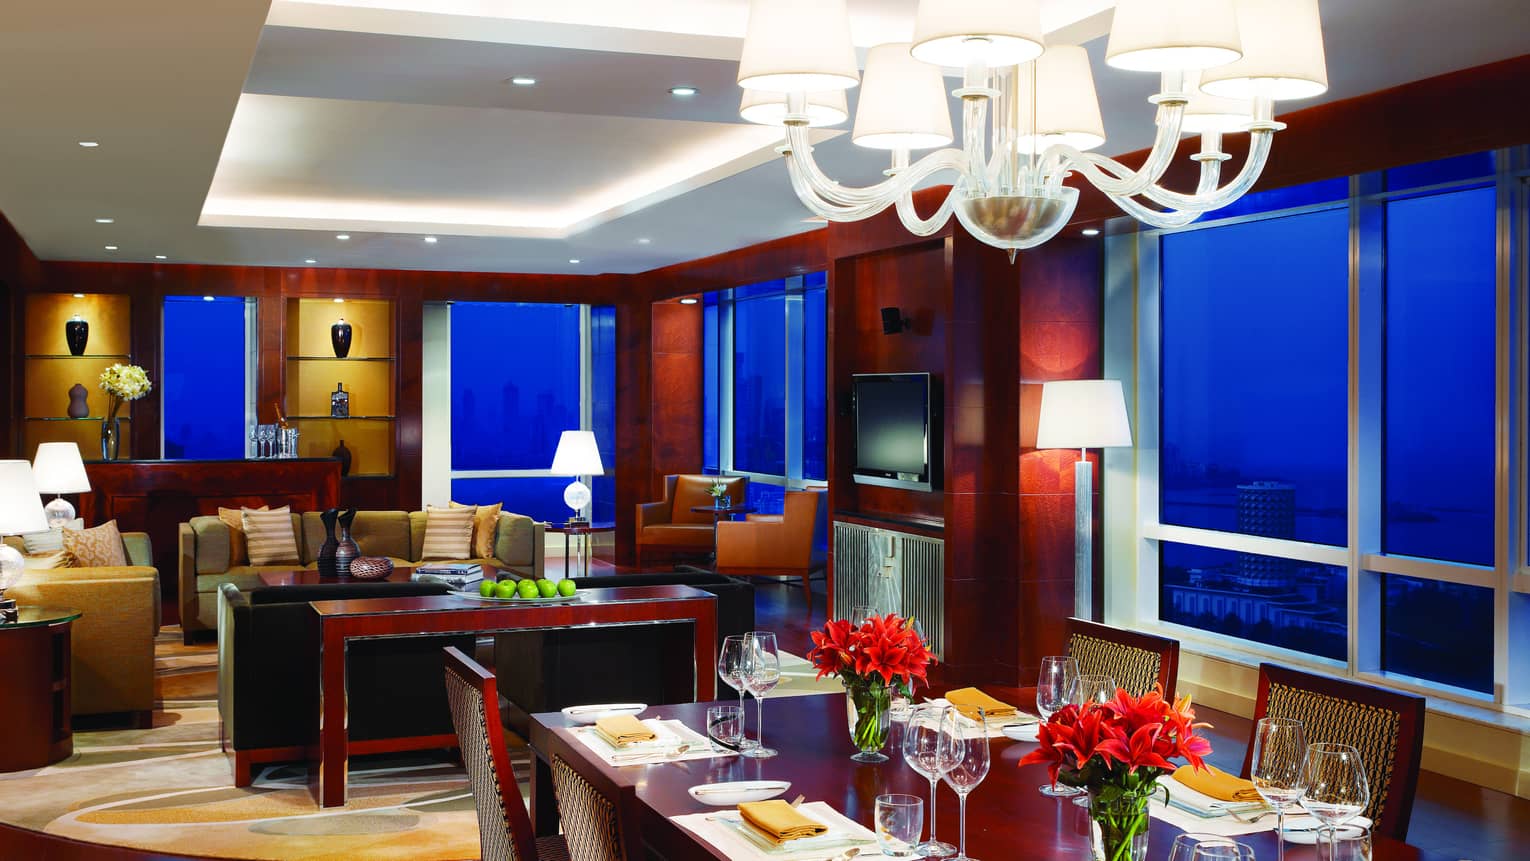 Presidential Suite long dining table under chandelier, seating area, corner windows at night